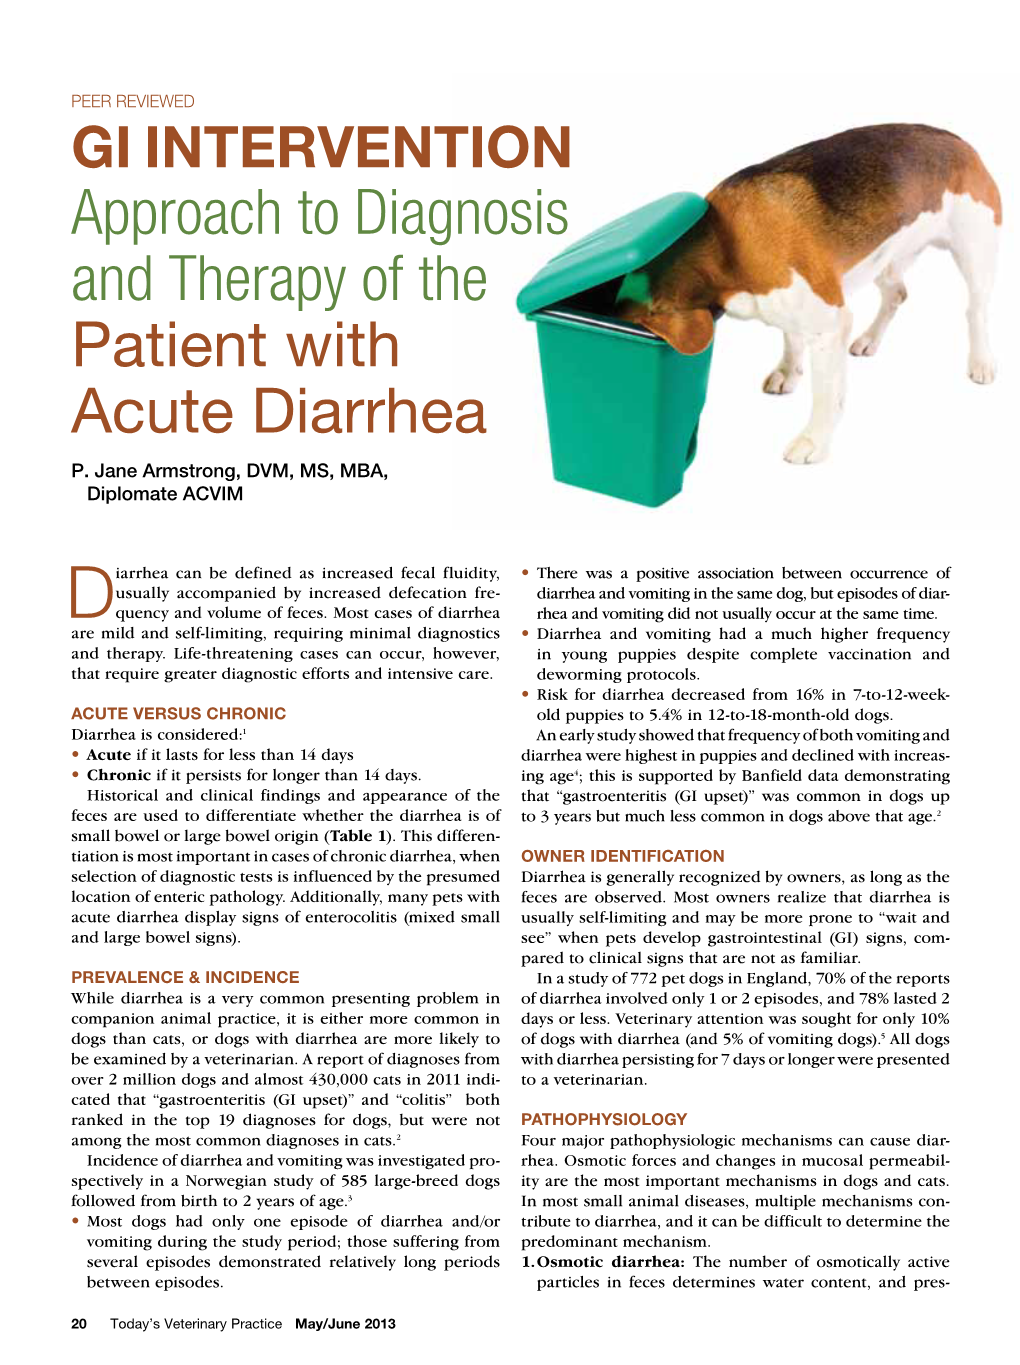 Approach to Diagnosis and Therapy of the Patient with Acute Diarrhea P